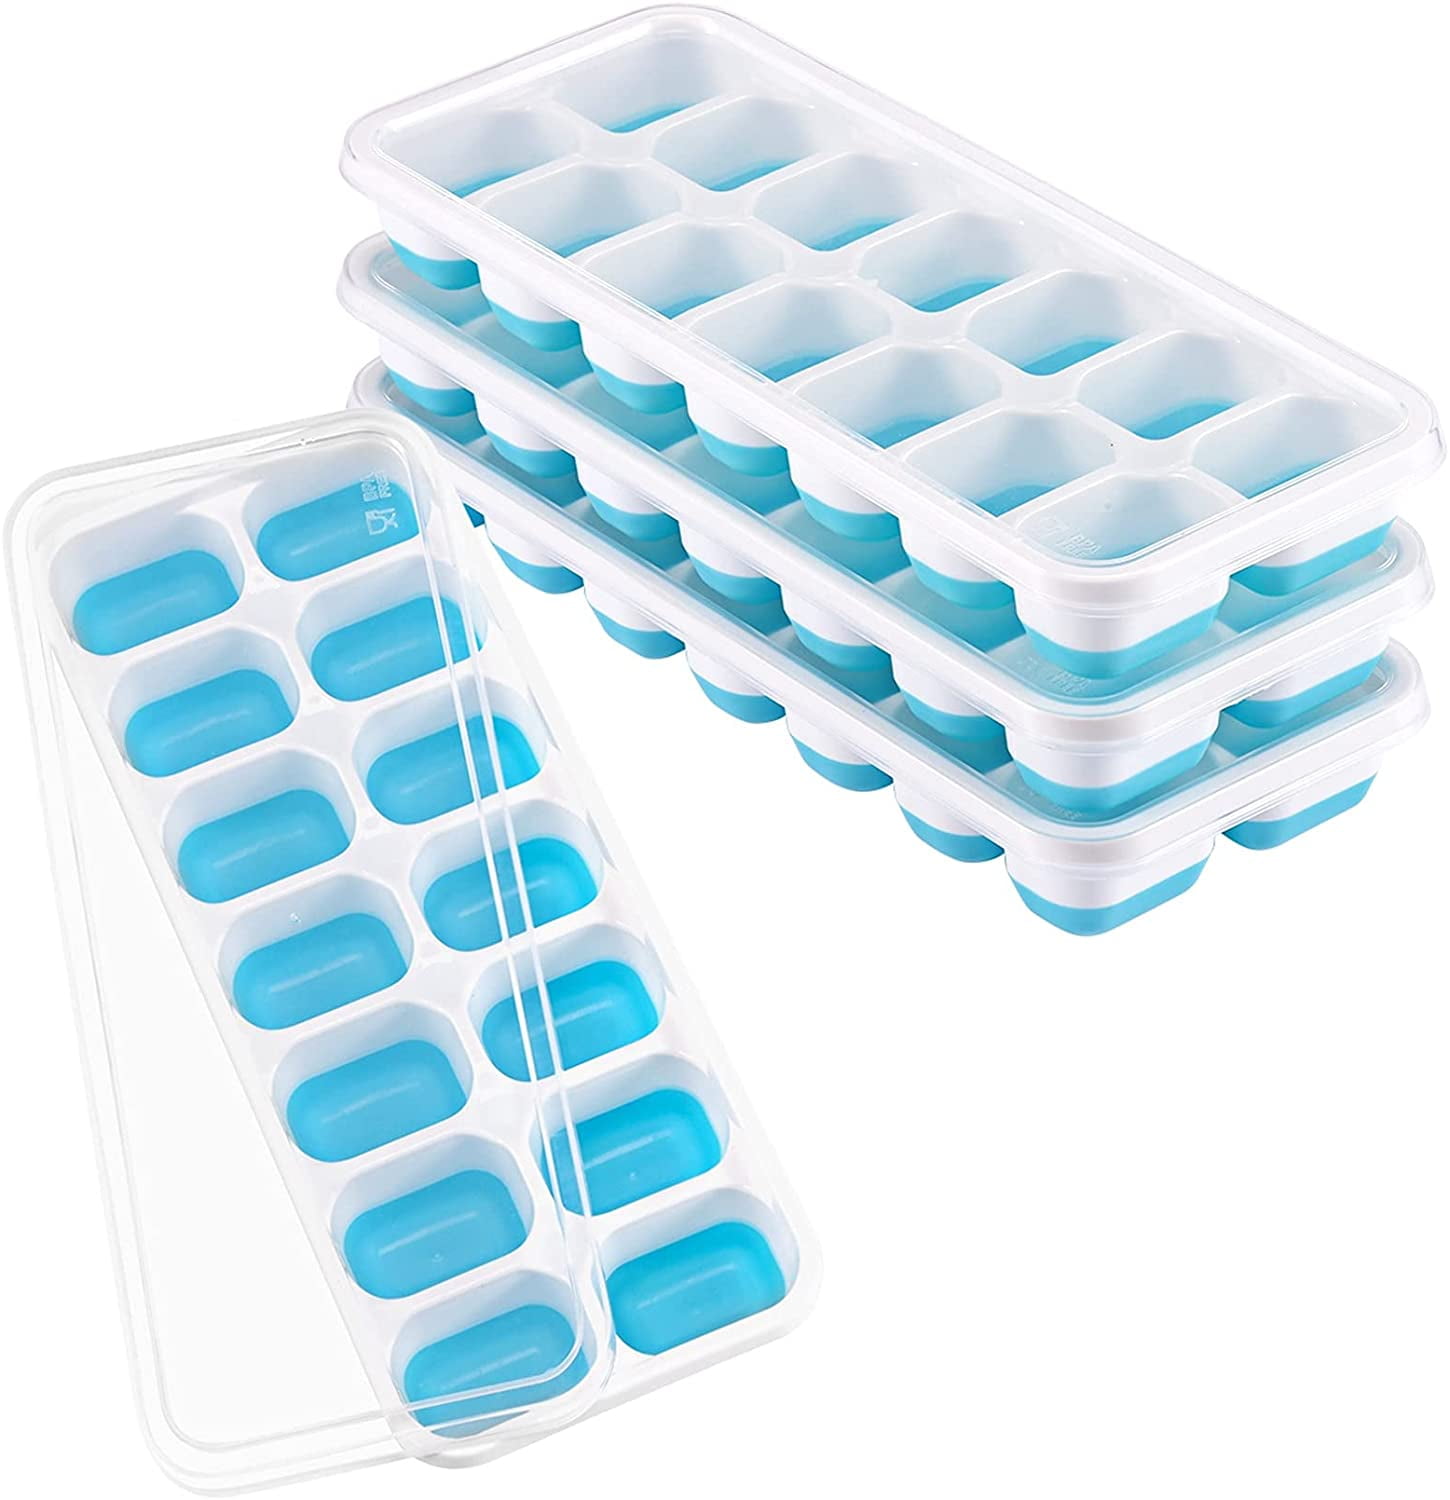 Ice Cube Trays,TOPELEK Easy Release Silicone Ice Cube Trays with Spill-Resistant Lids Make 56 Ice Cubes,FDA Approved/BPA-free Ice Cube Tray Set for Freezing Baby Food,Cocktails,Whiskey-Dishwasher Safe